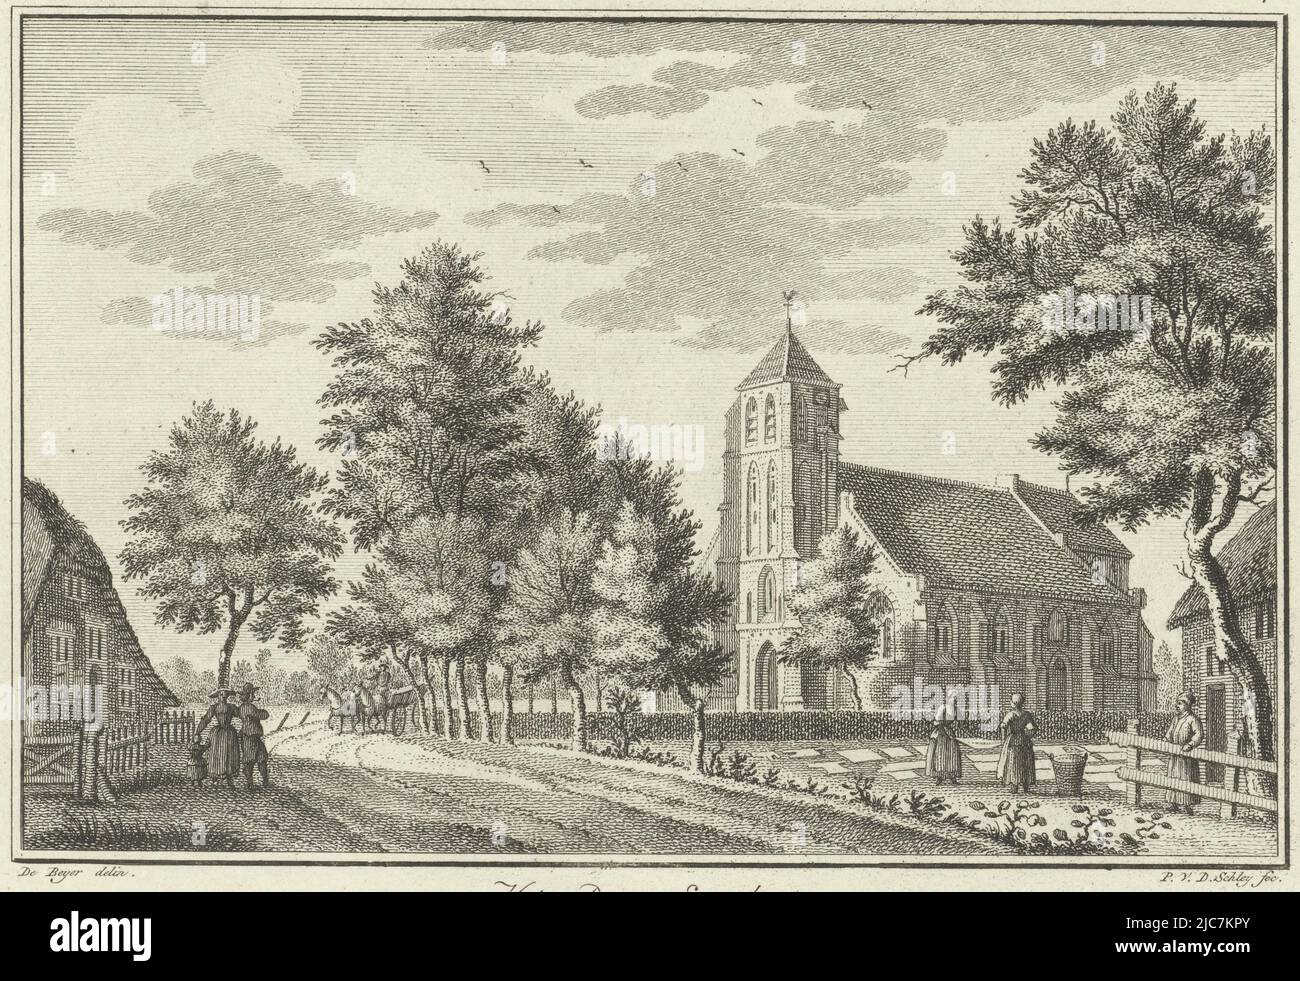 View of the village of Enspijk in Gelderland, with the church on the right. In the foreground women drying laundry in the sun. View of Enspijk The Village of Enspyk , print maker: Philippus van der Schley, (mentioned on object), intermediary draughtsman: Jan de Beijer, (mentioned on object), Netherlands, 1734 - 1817, paper, etching, h 145 mm × w 207 mm Stock Photo